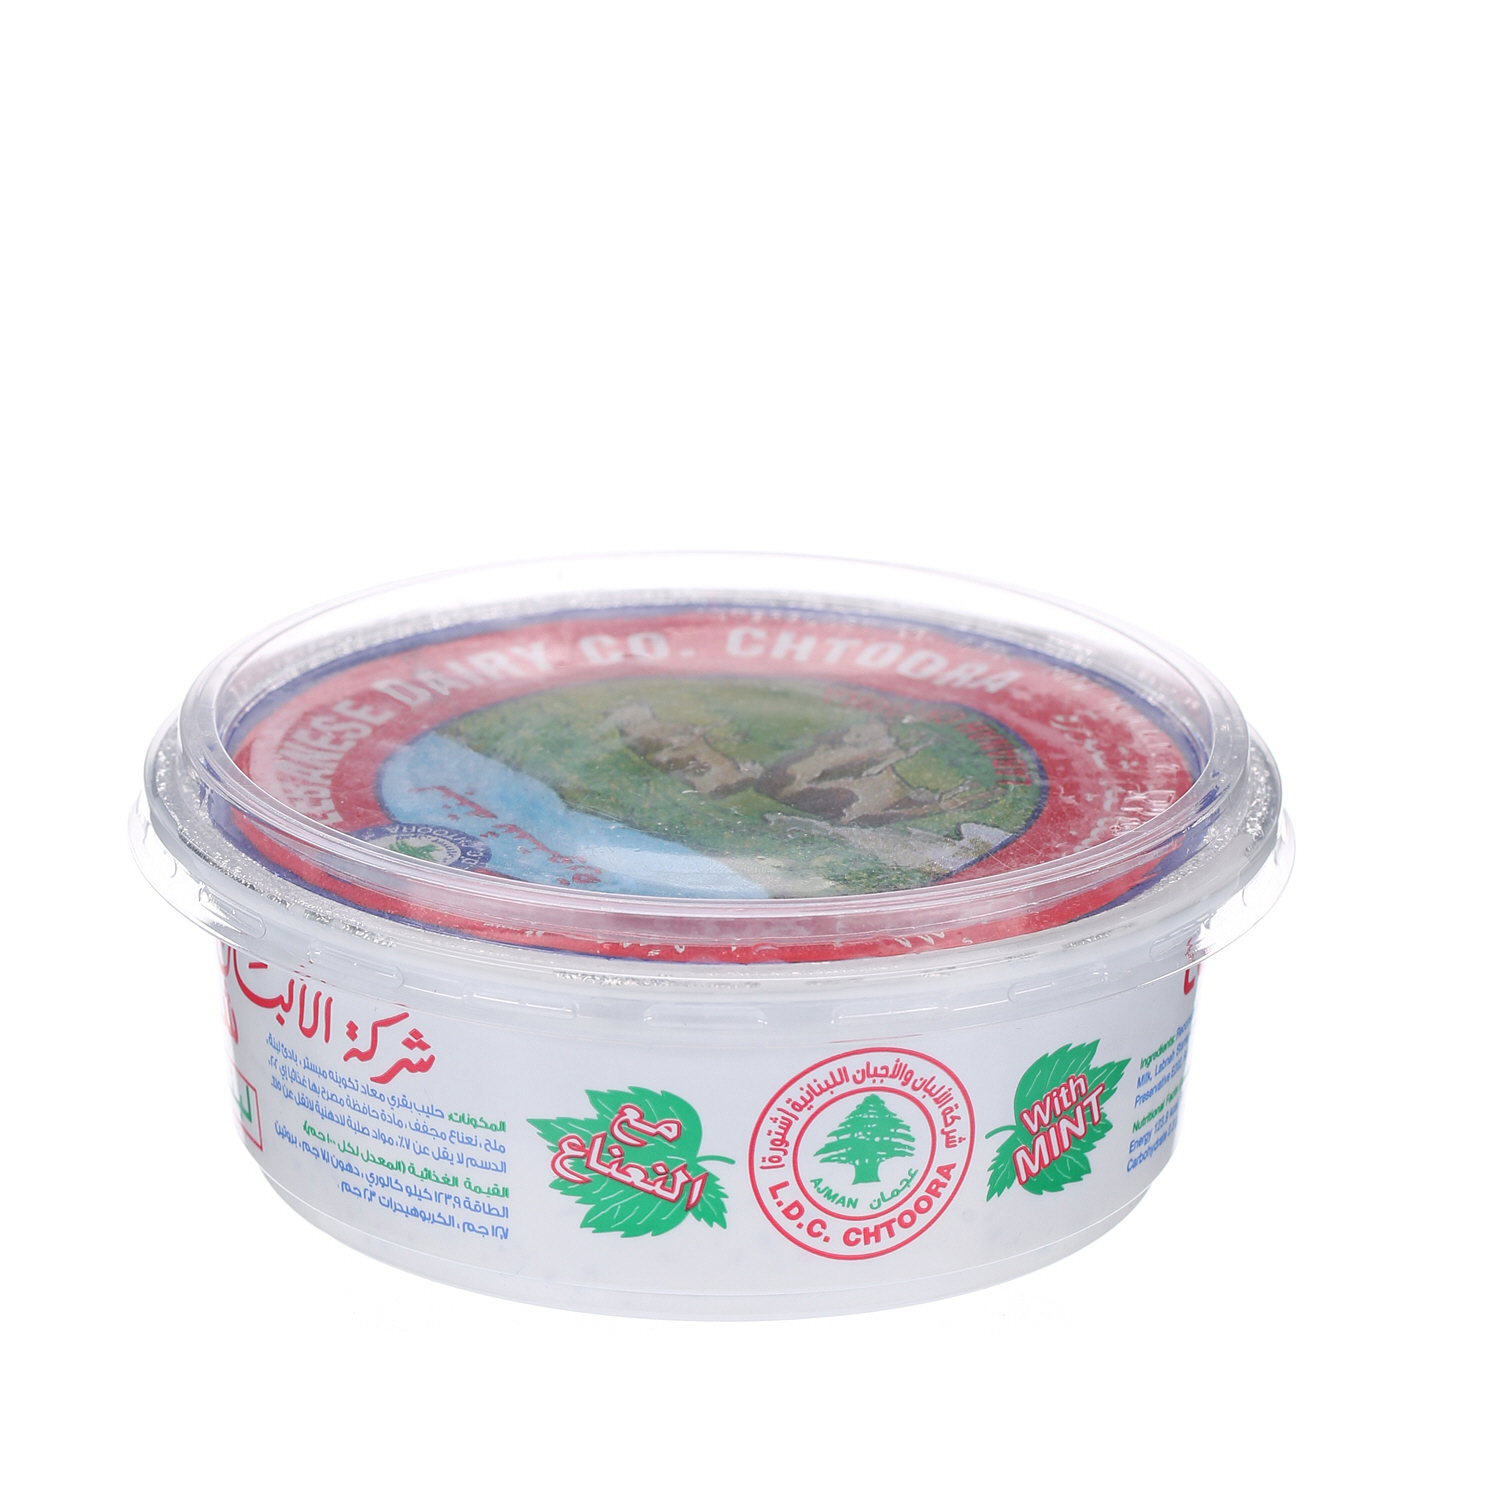 Chtoora Labnah with Mint 225 g